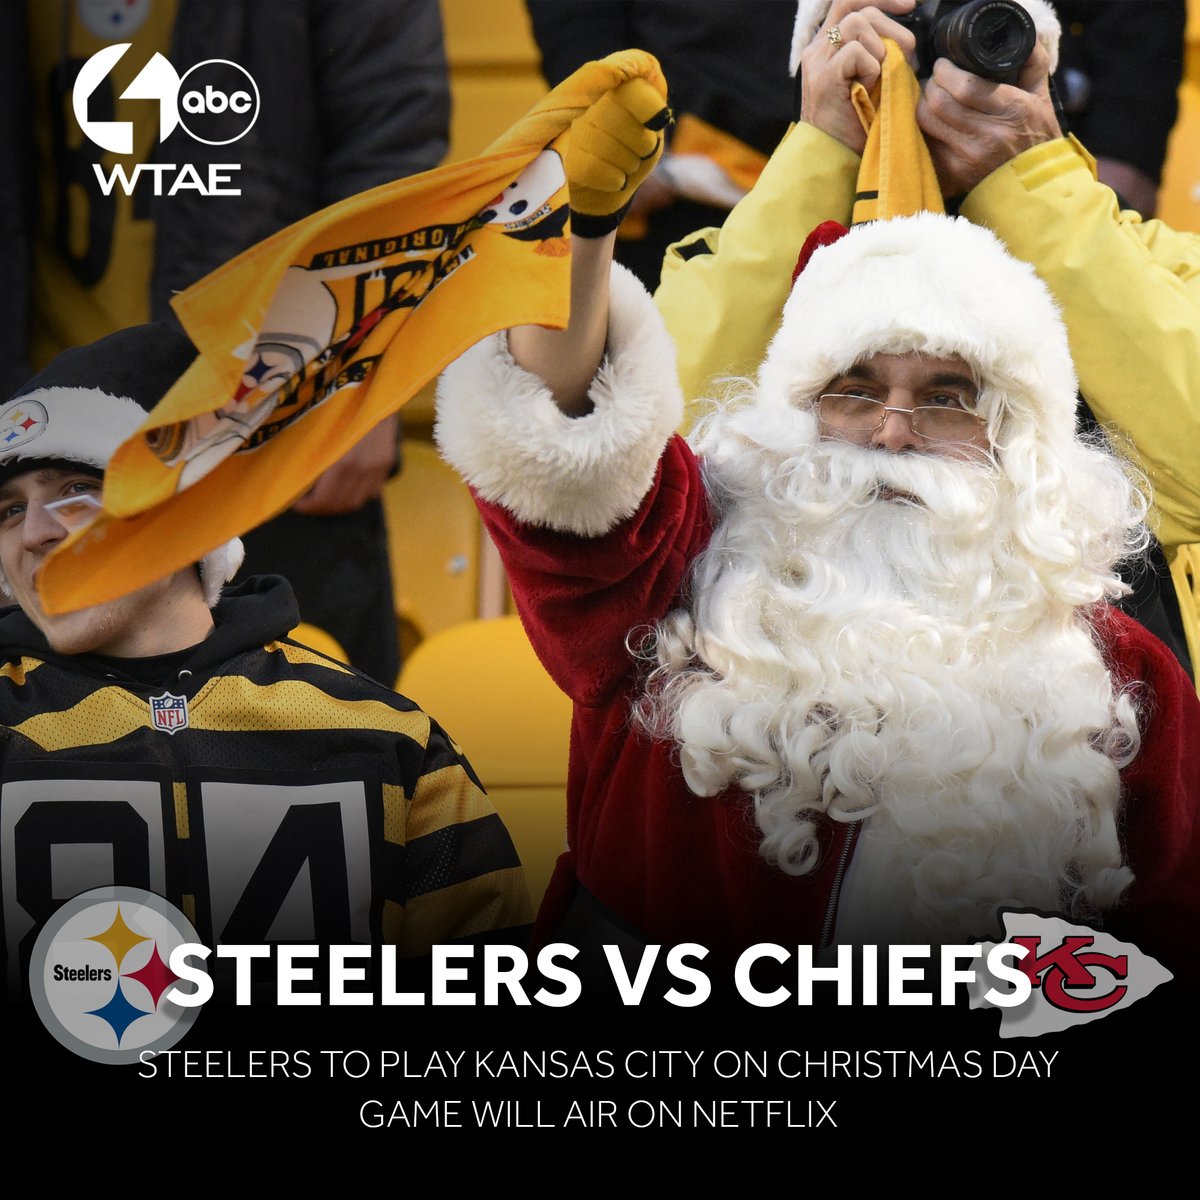 Here we go! Steelers vs. Chiefs on Christmas Day in Pittsburgh! MORE ABOUT GAME DAY: wtae.com/.../steelers-c…